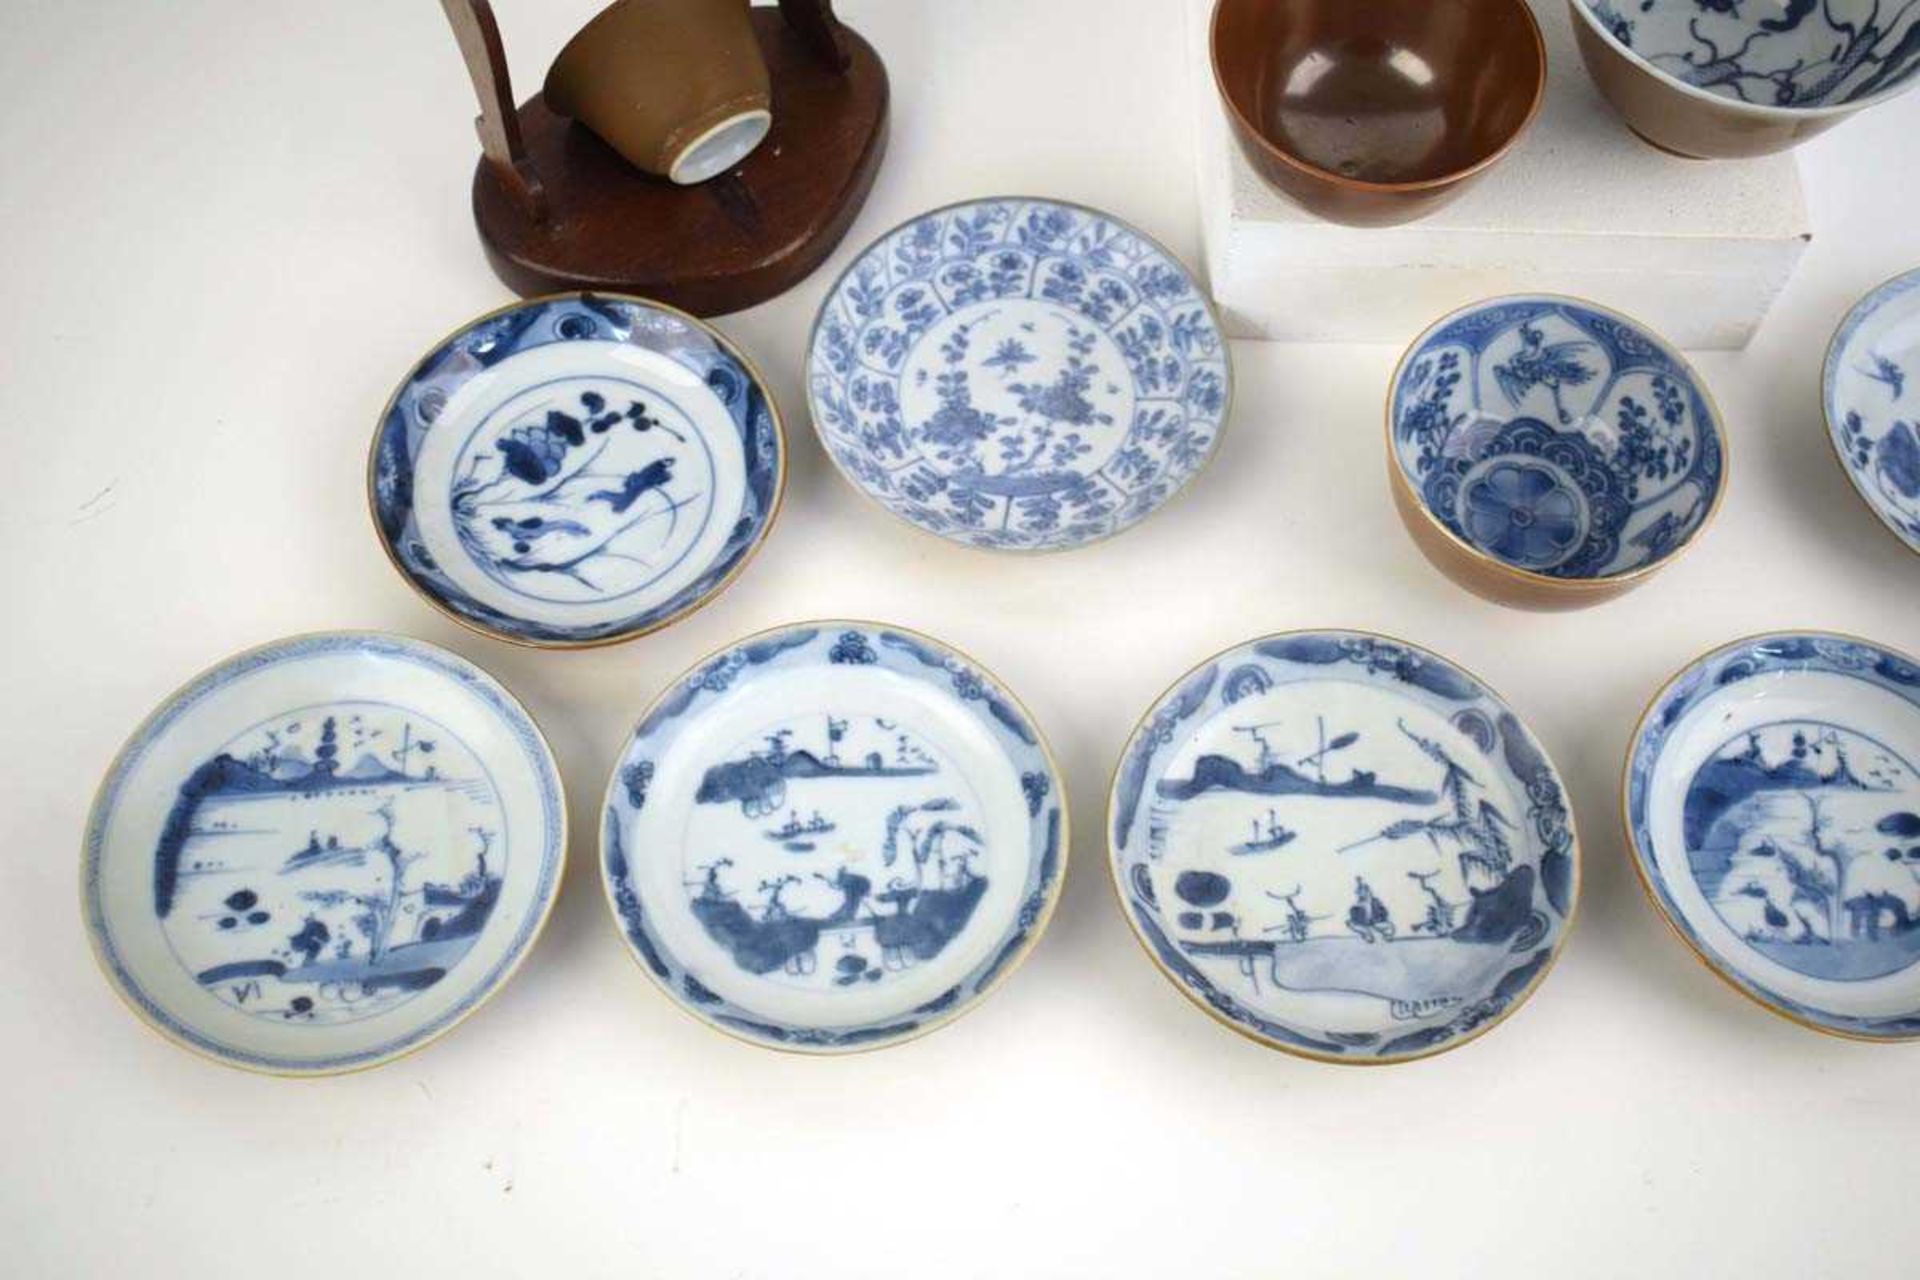 Fifteen items of Batavia porcelain, each decorated in a blue and white underglaze pattern, including - Bild 3 aus 23